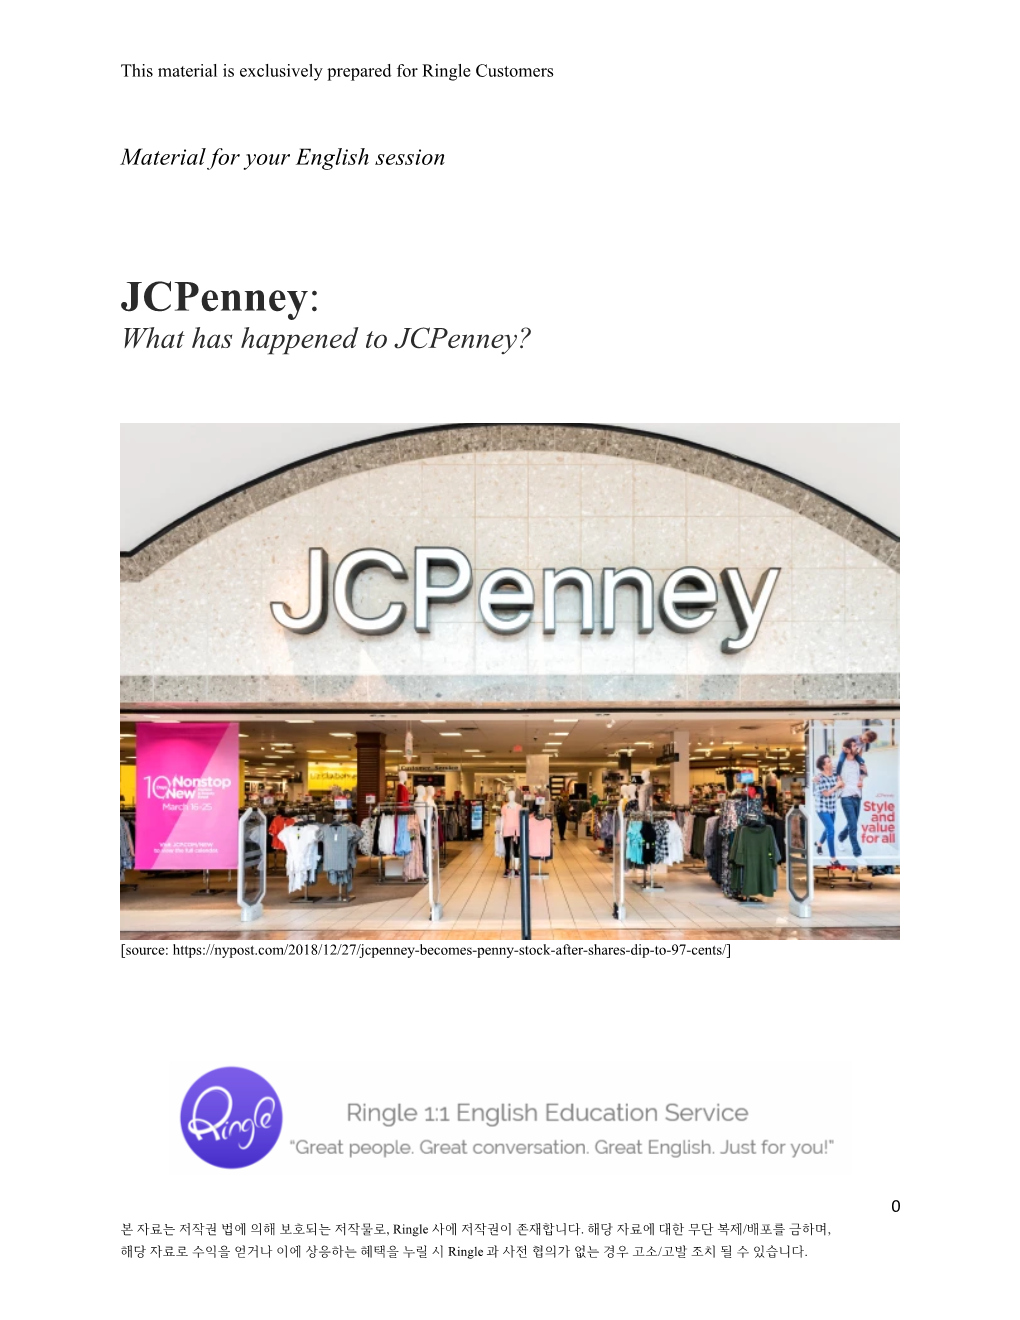 Jcpenney: What Has Happened to Jcpenney?